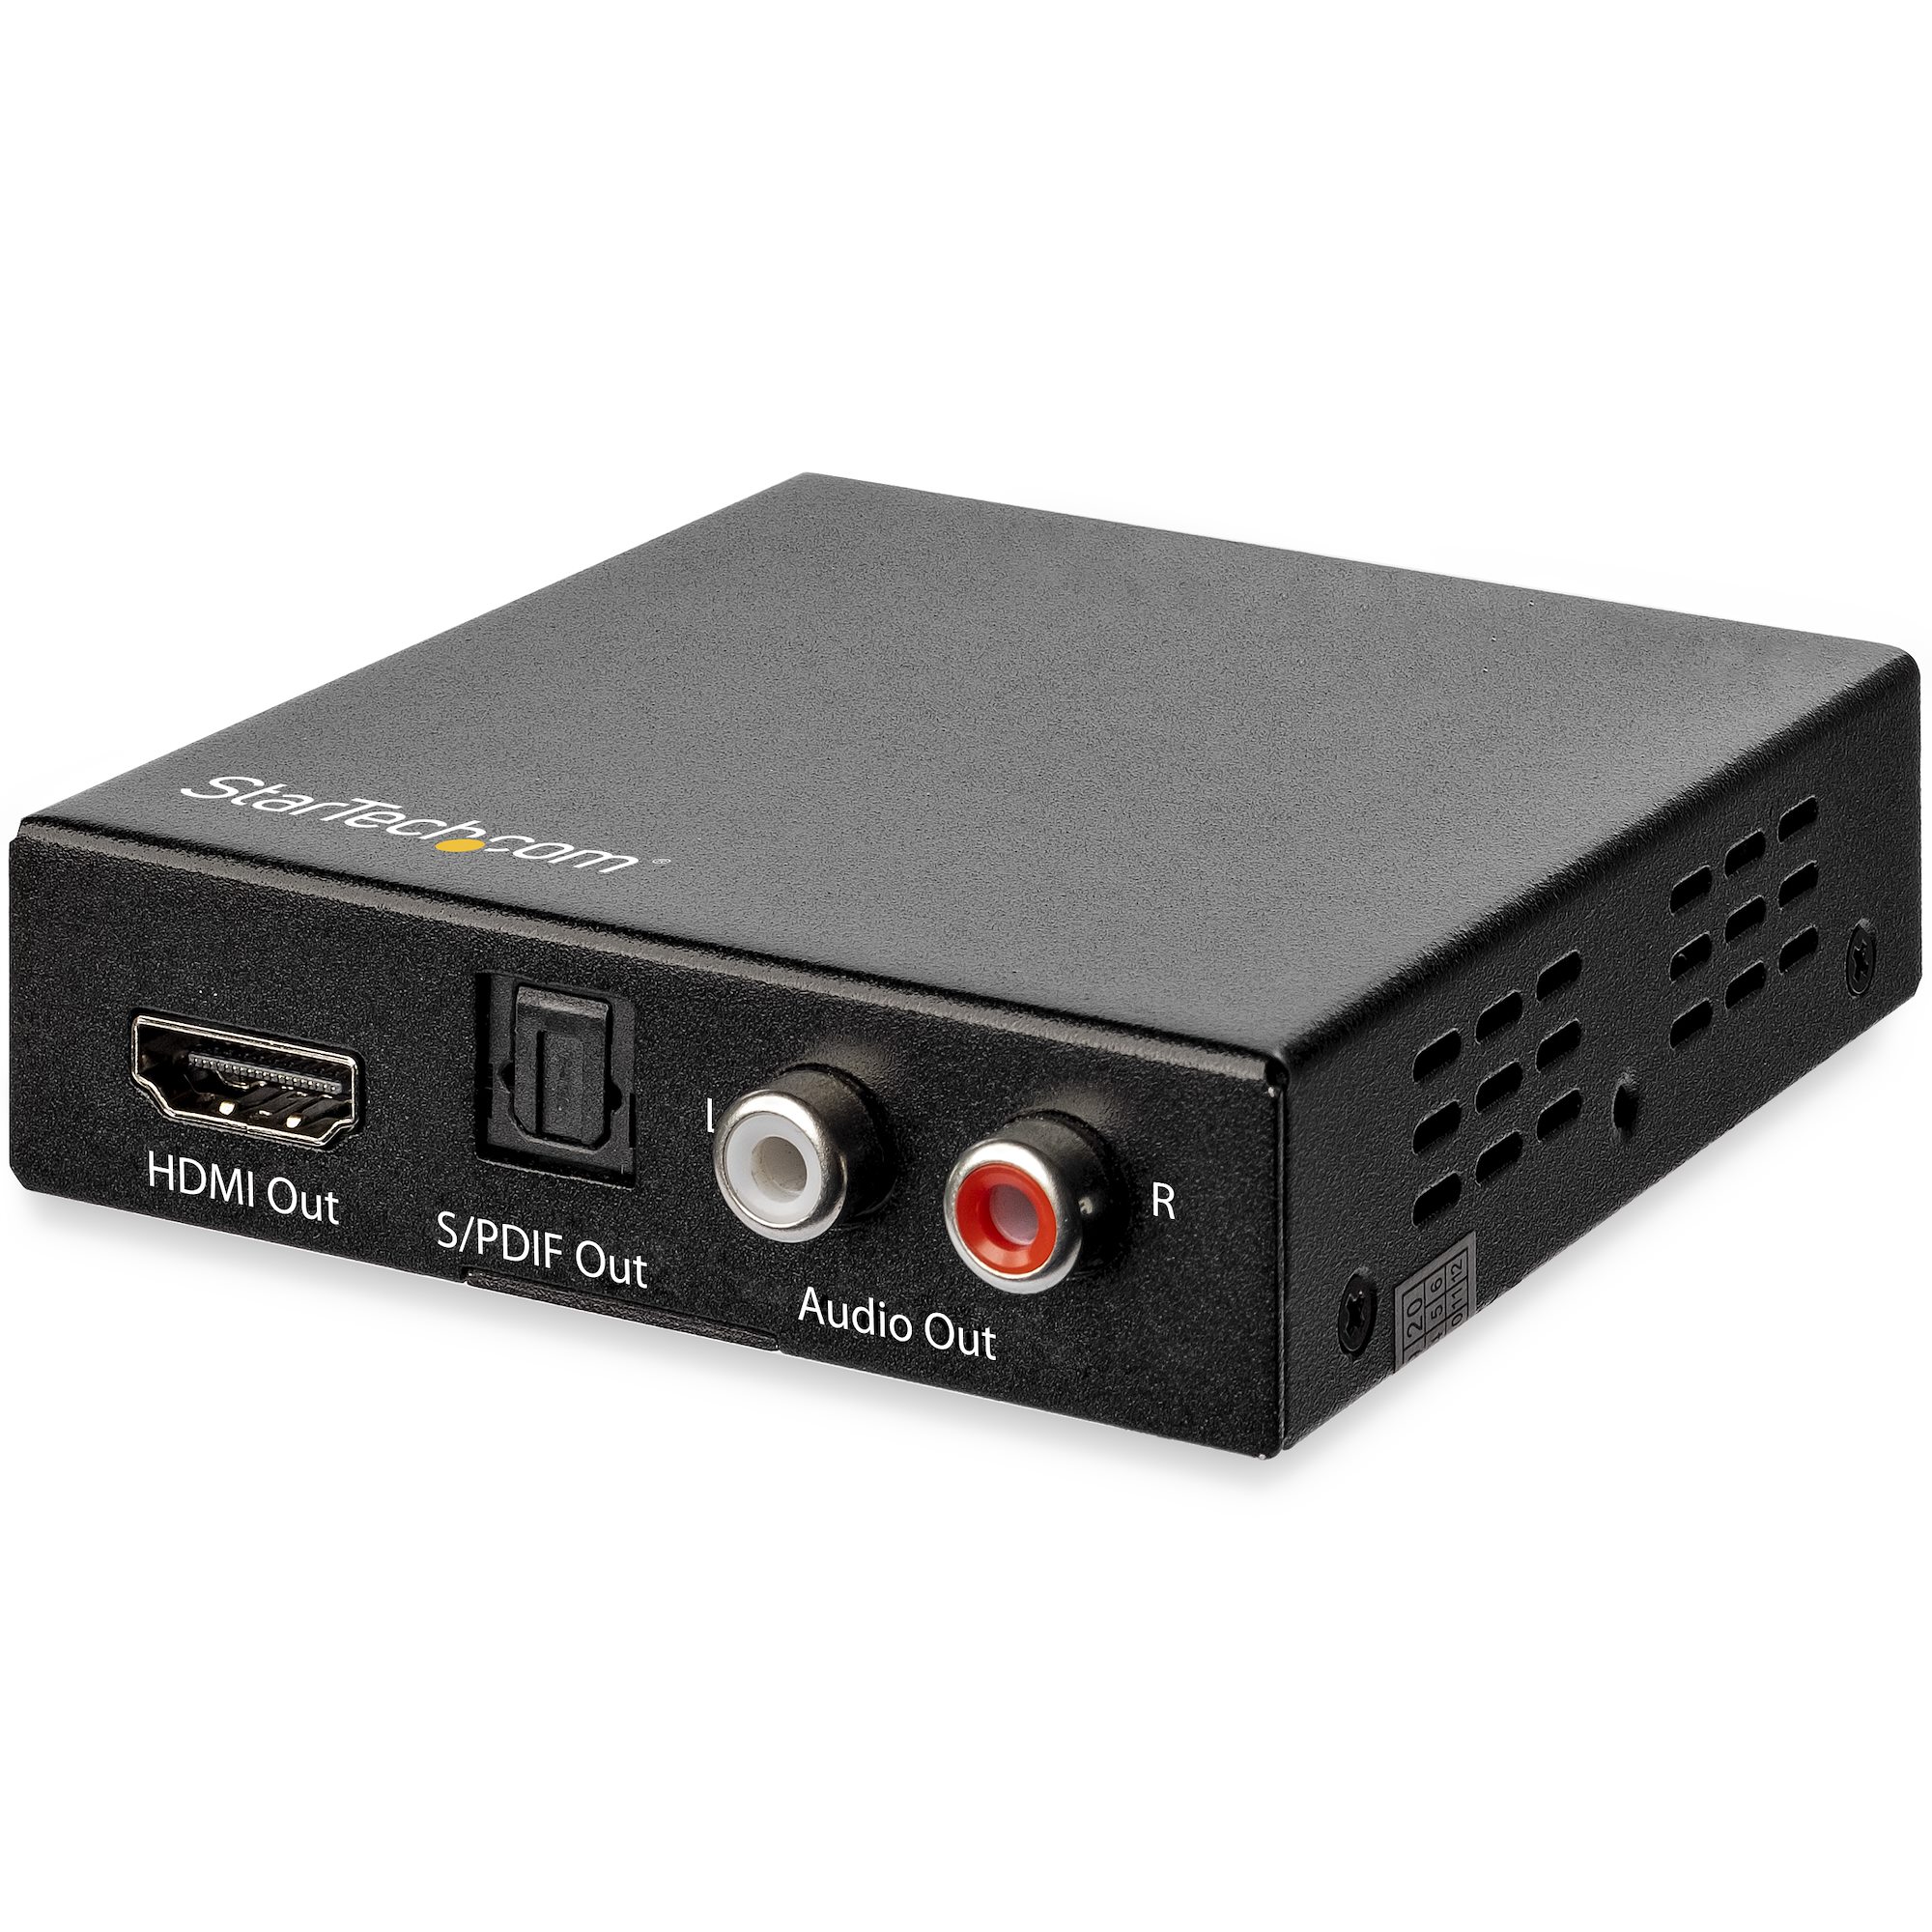 【HD202A】4K HDMI AUDIO EXTRACTOR - 4K 60H